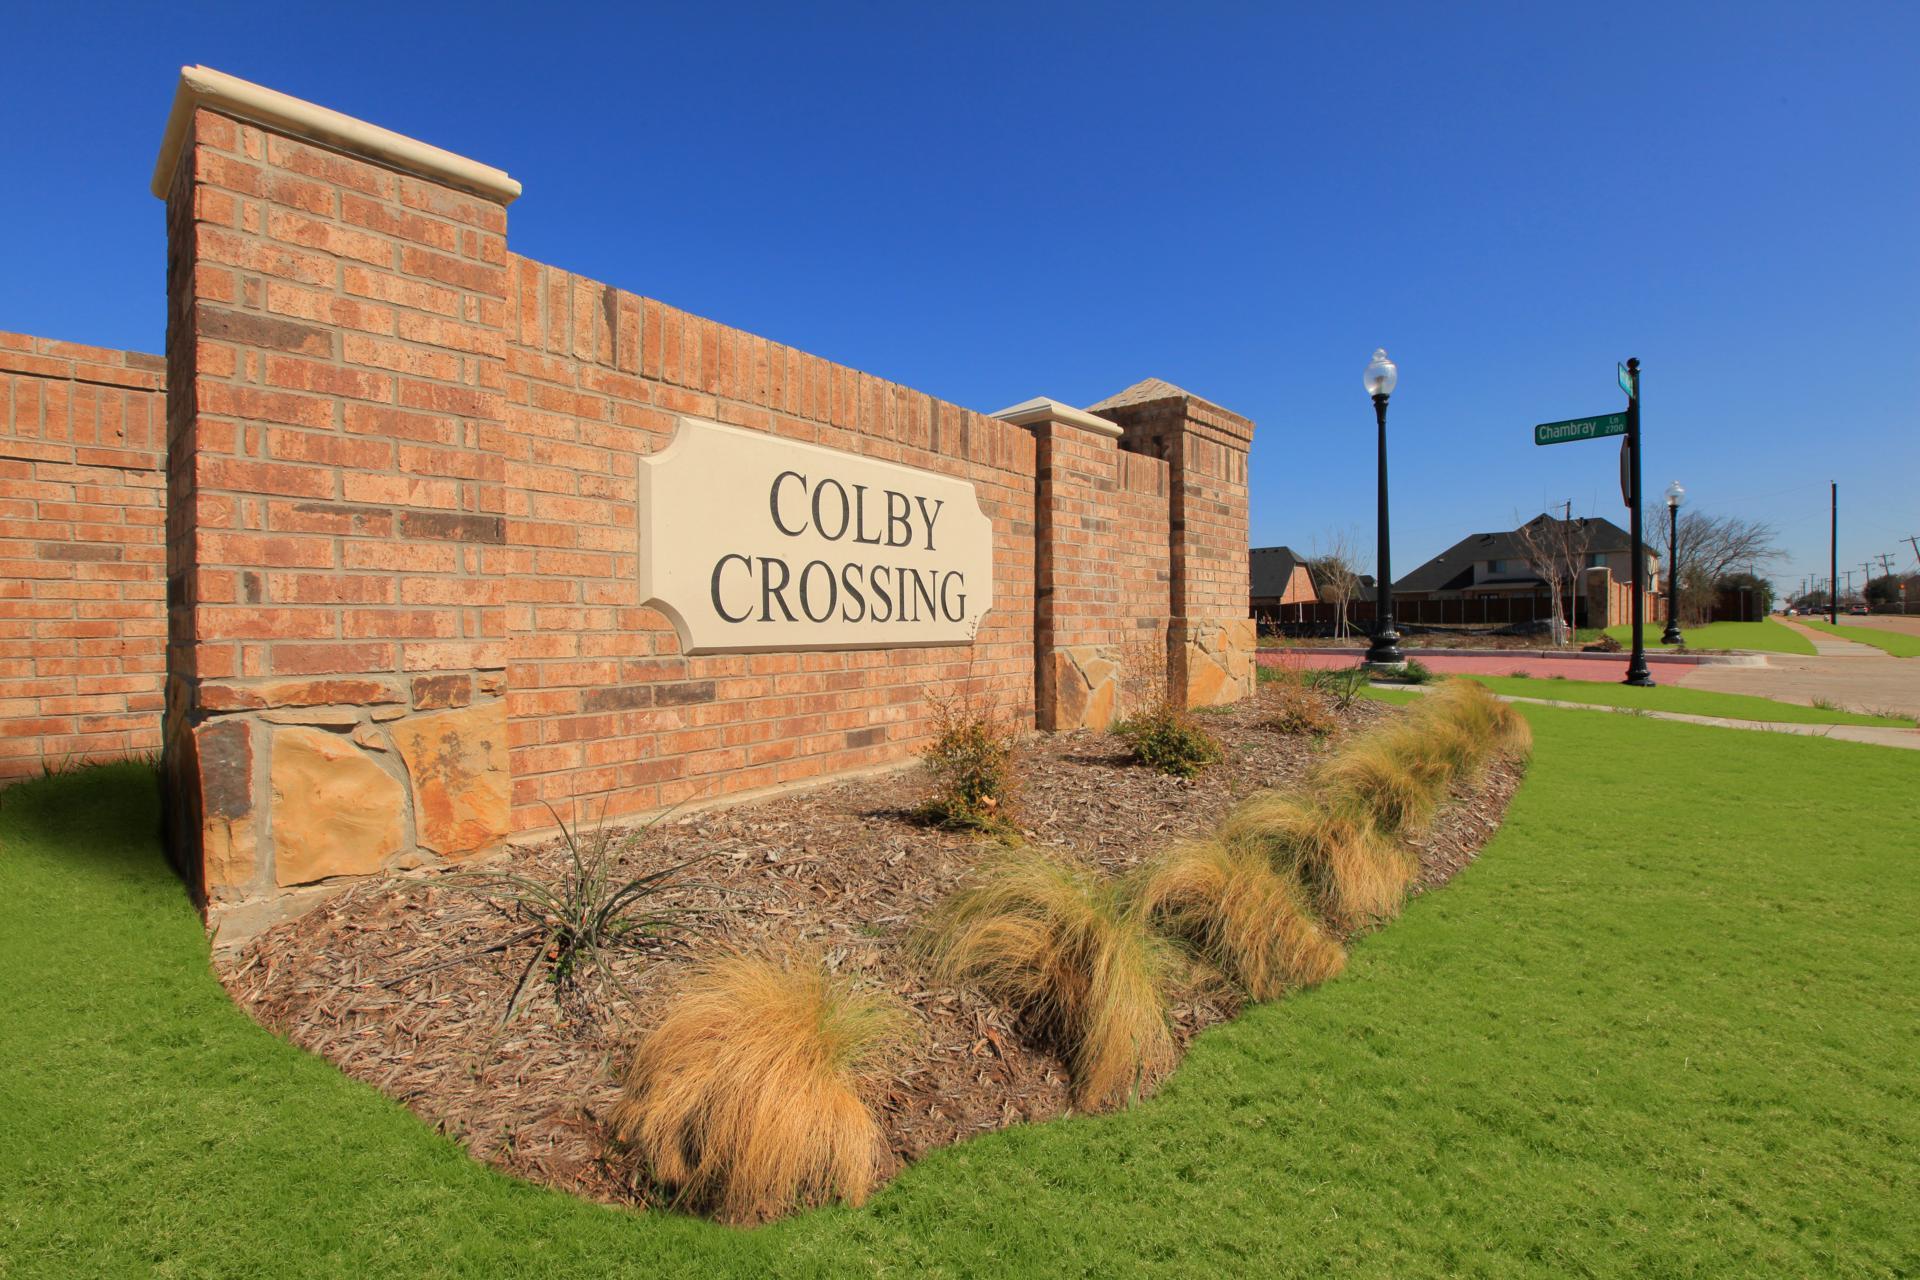 The Colby Crossing Entrance